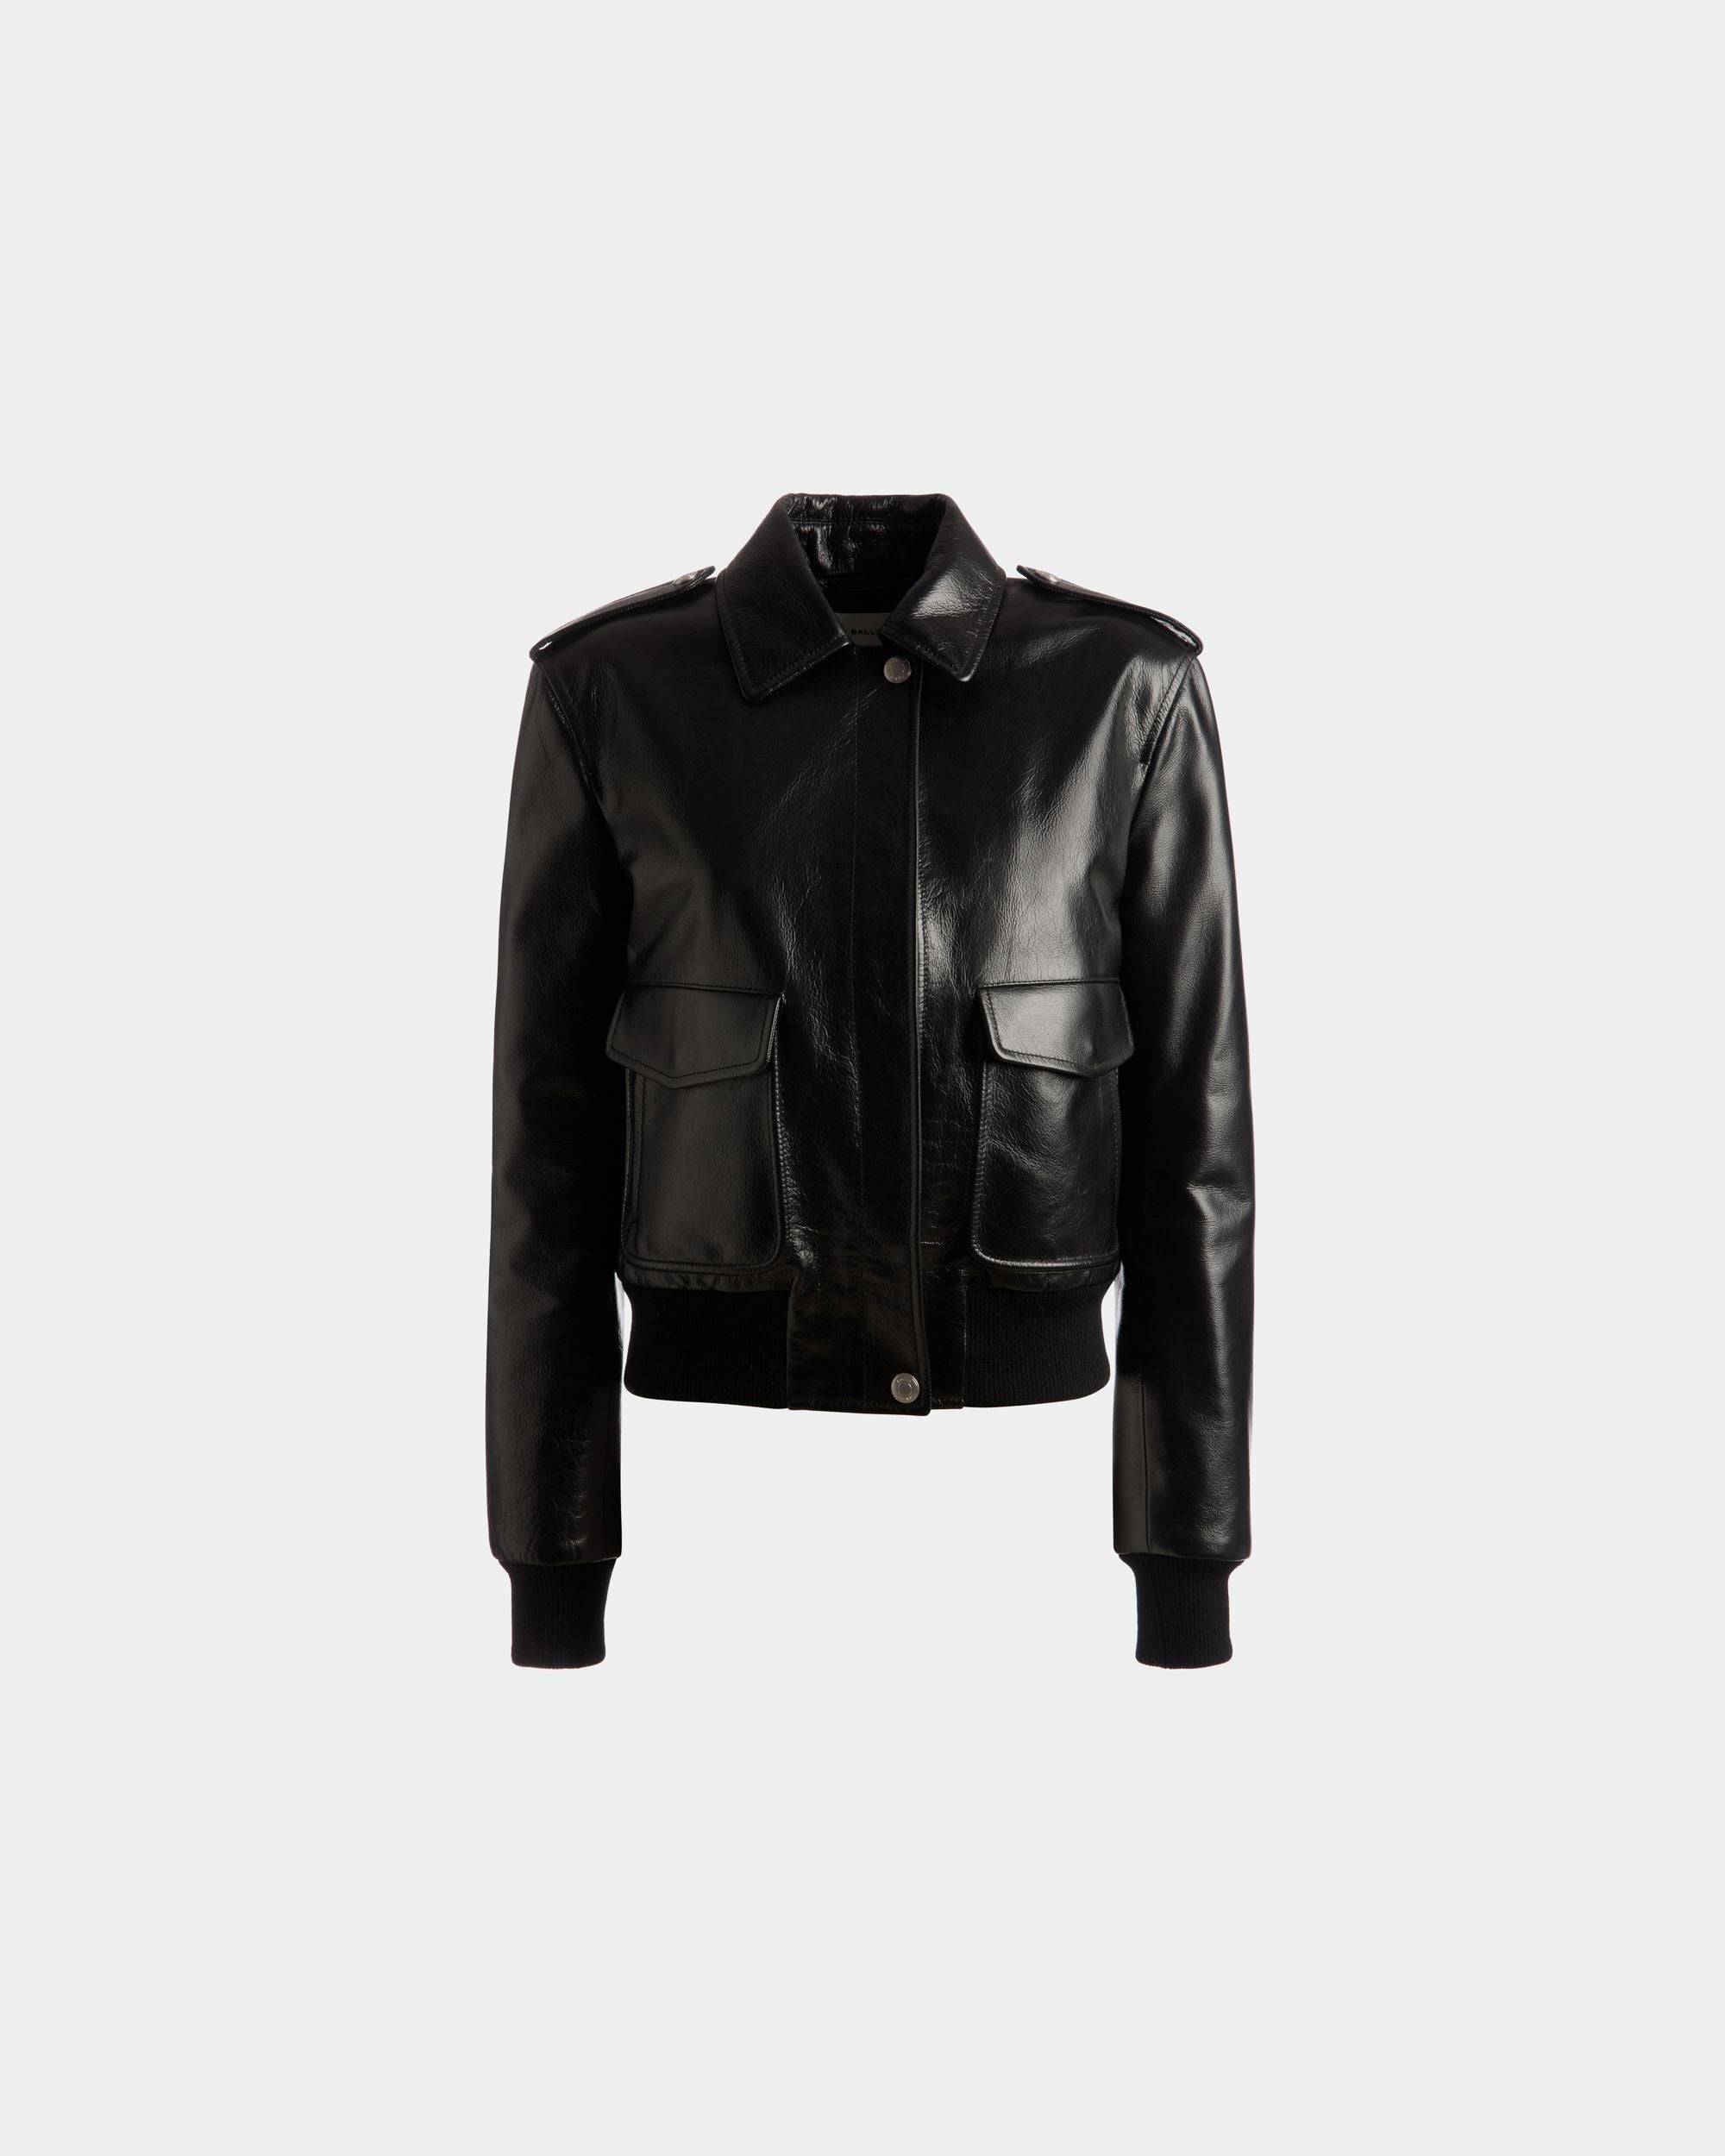 Bomber Jacket | Women's Outerwear | Black Leather | Bally | Still Life Front